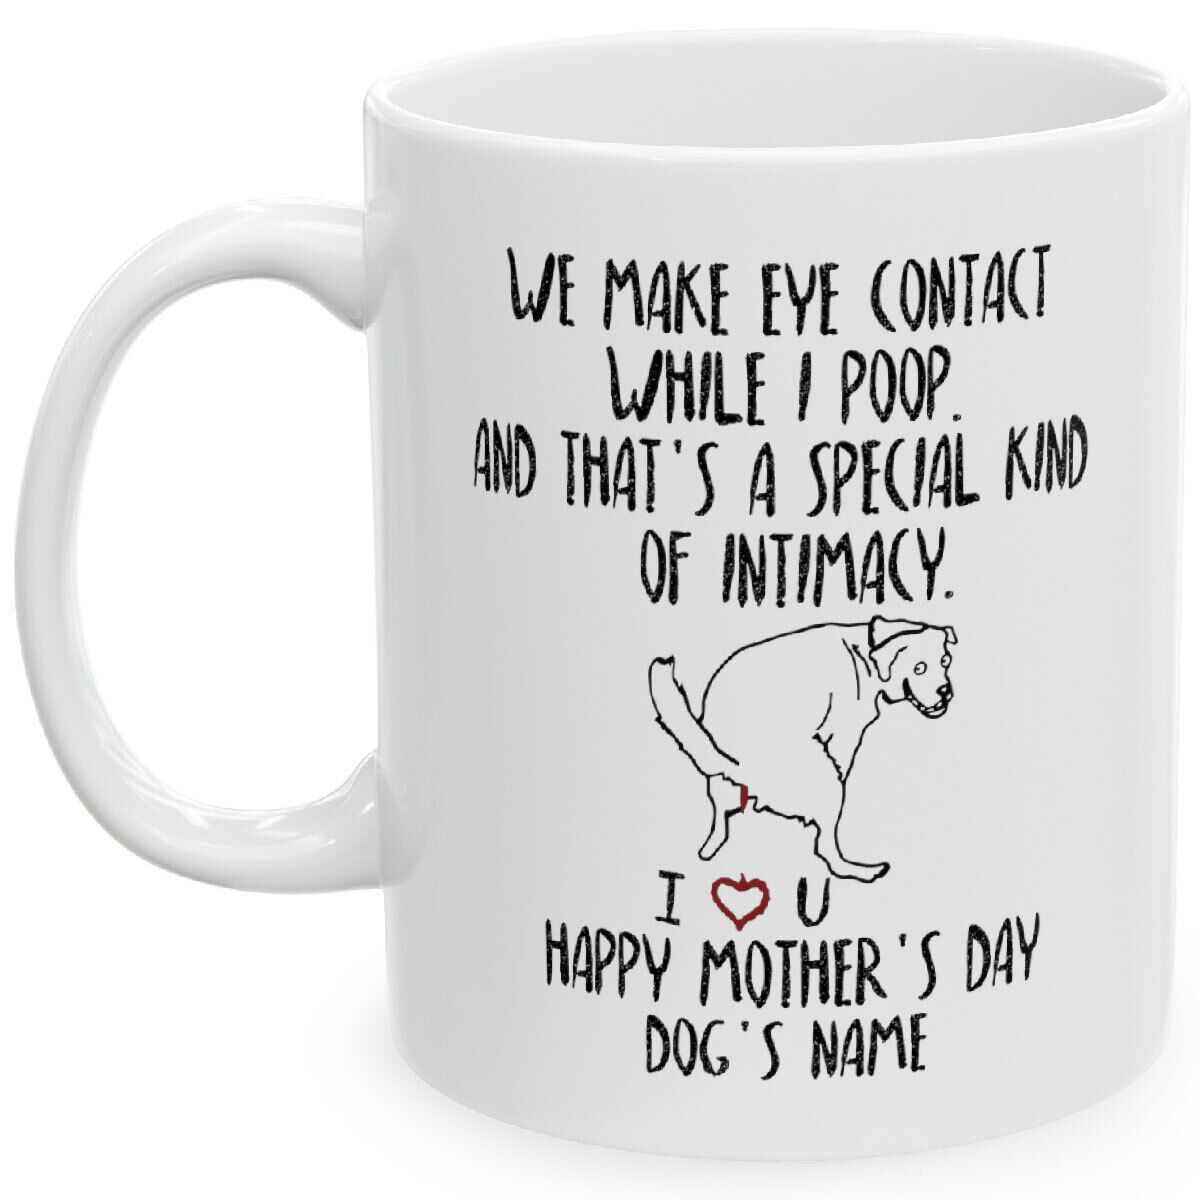 Personalized MUG Gifts For Dog Mom Happy Mother's Day We Make Eye Contact While